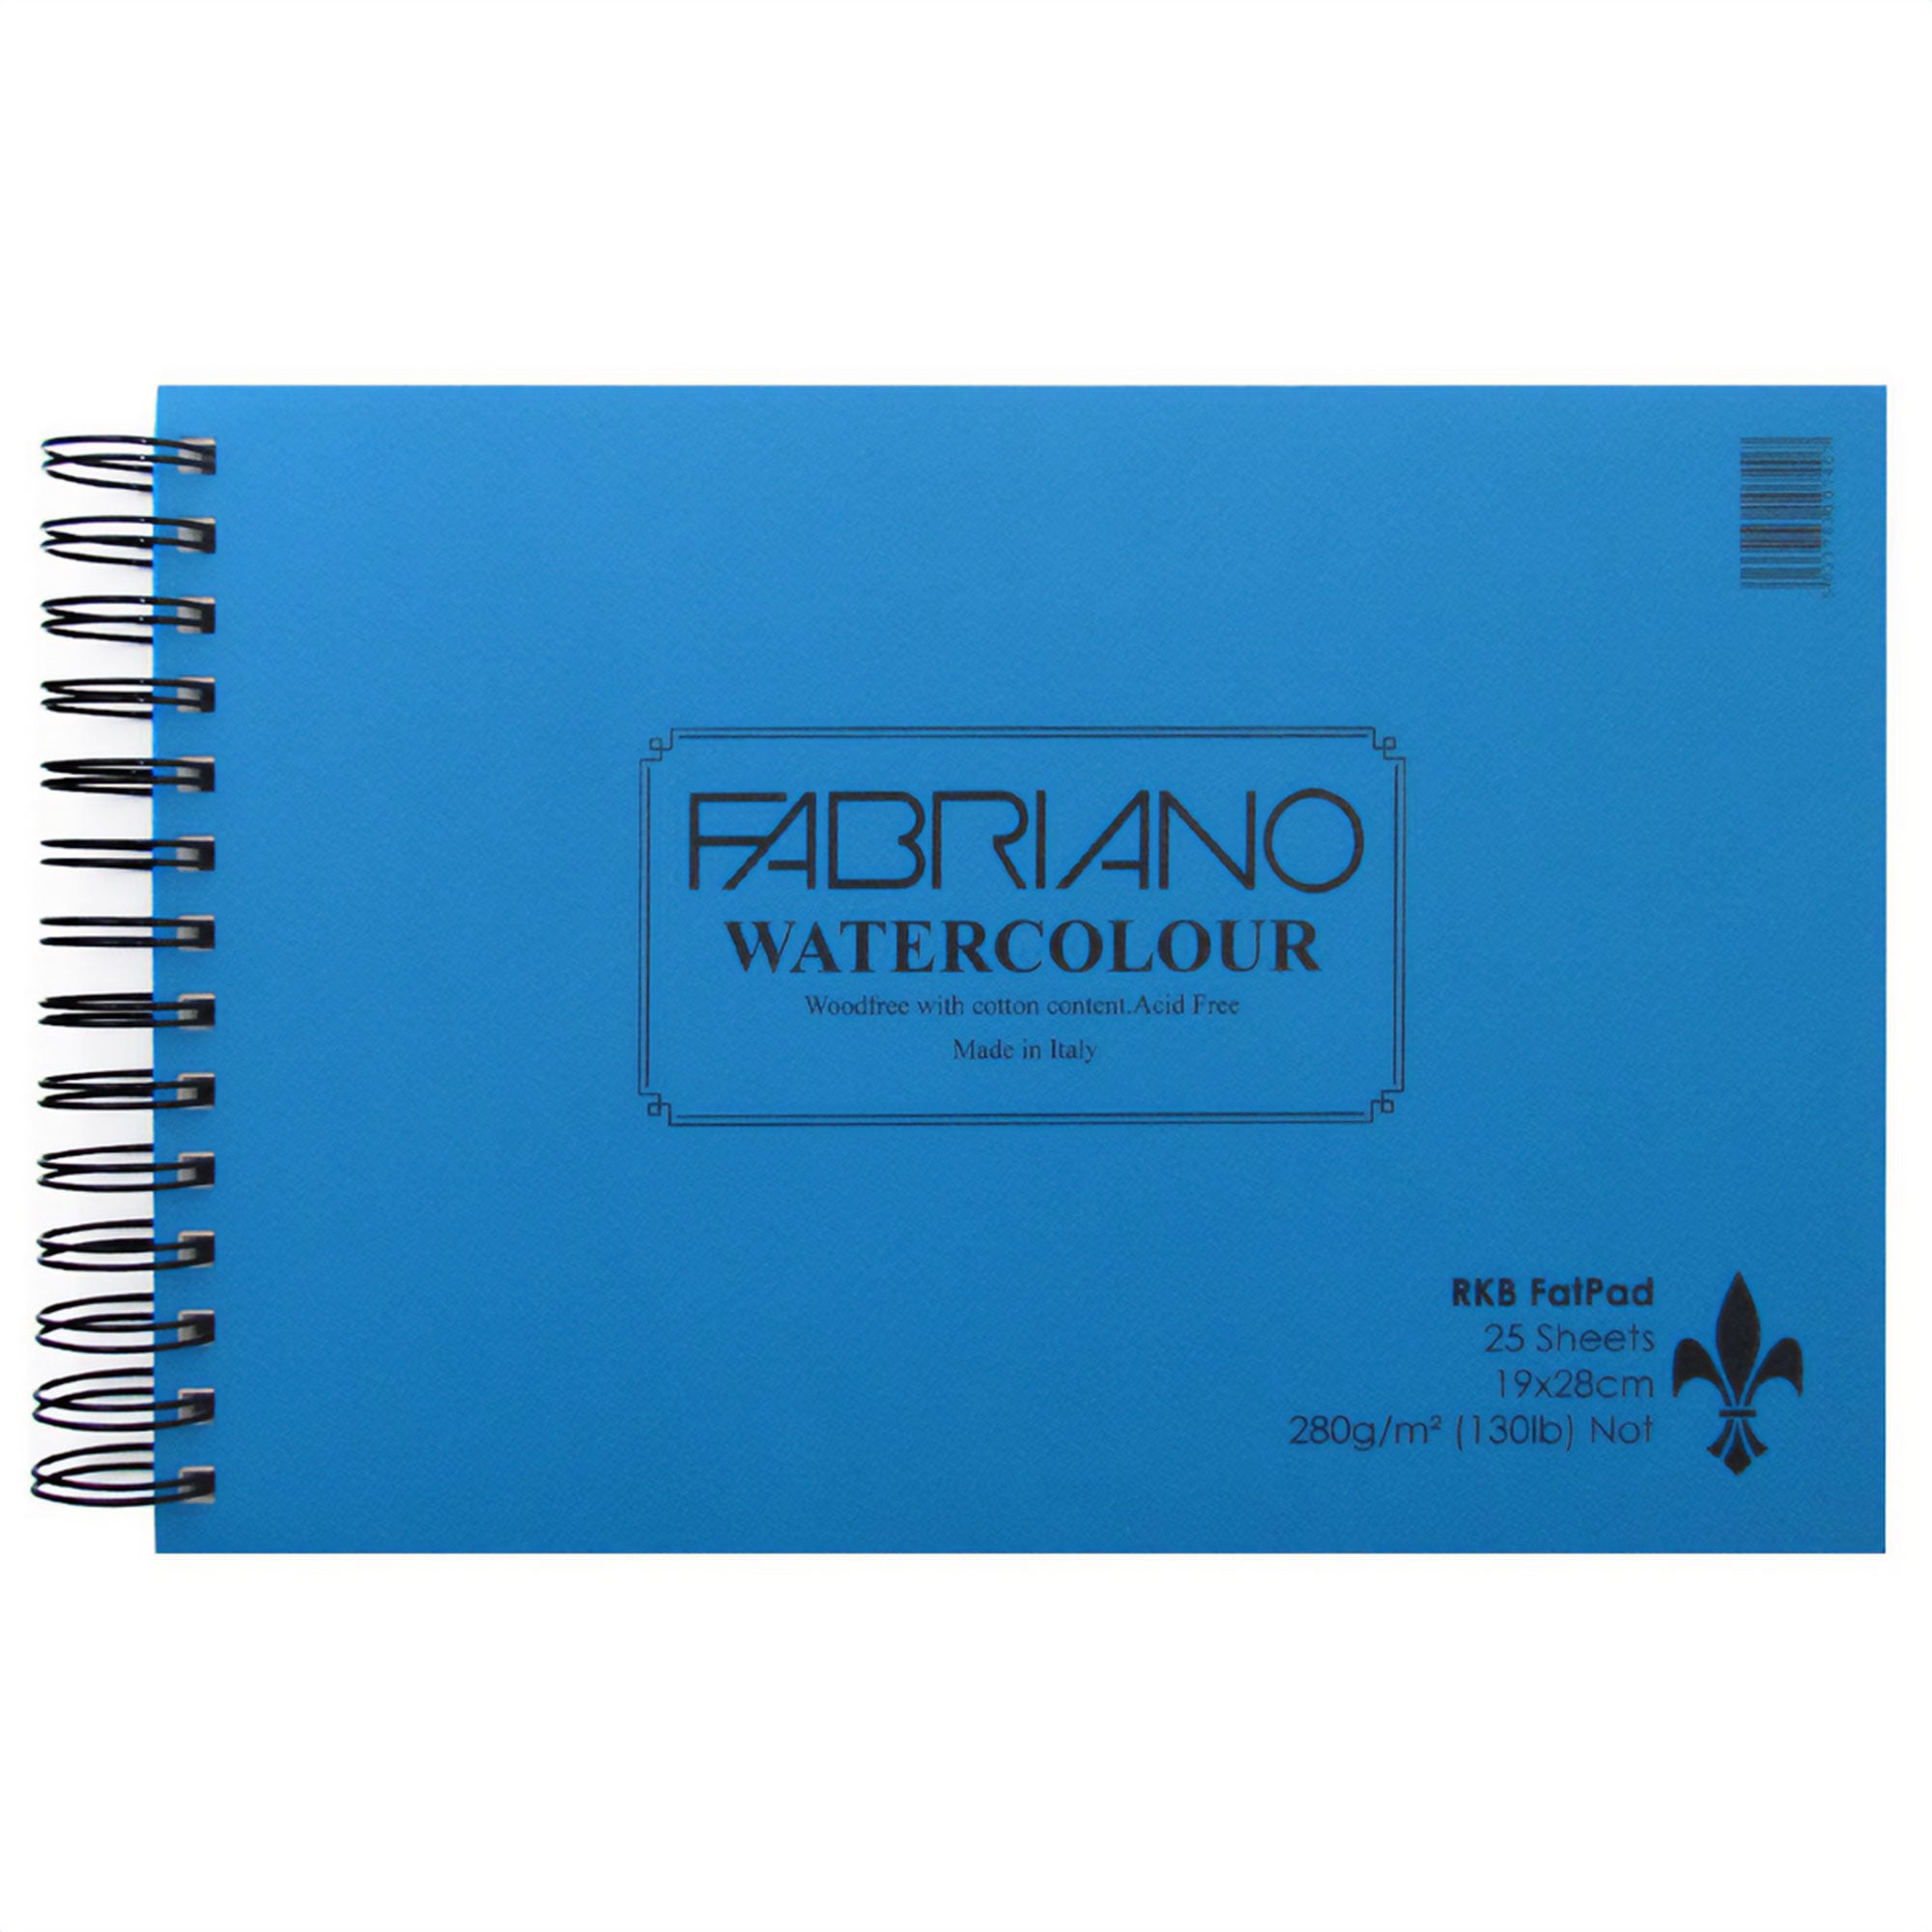 Fabriano Watercolour Cold Pressed (NOT) Fat Pads 280gsm/130lbs